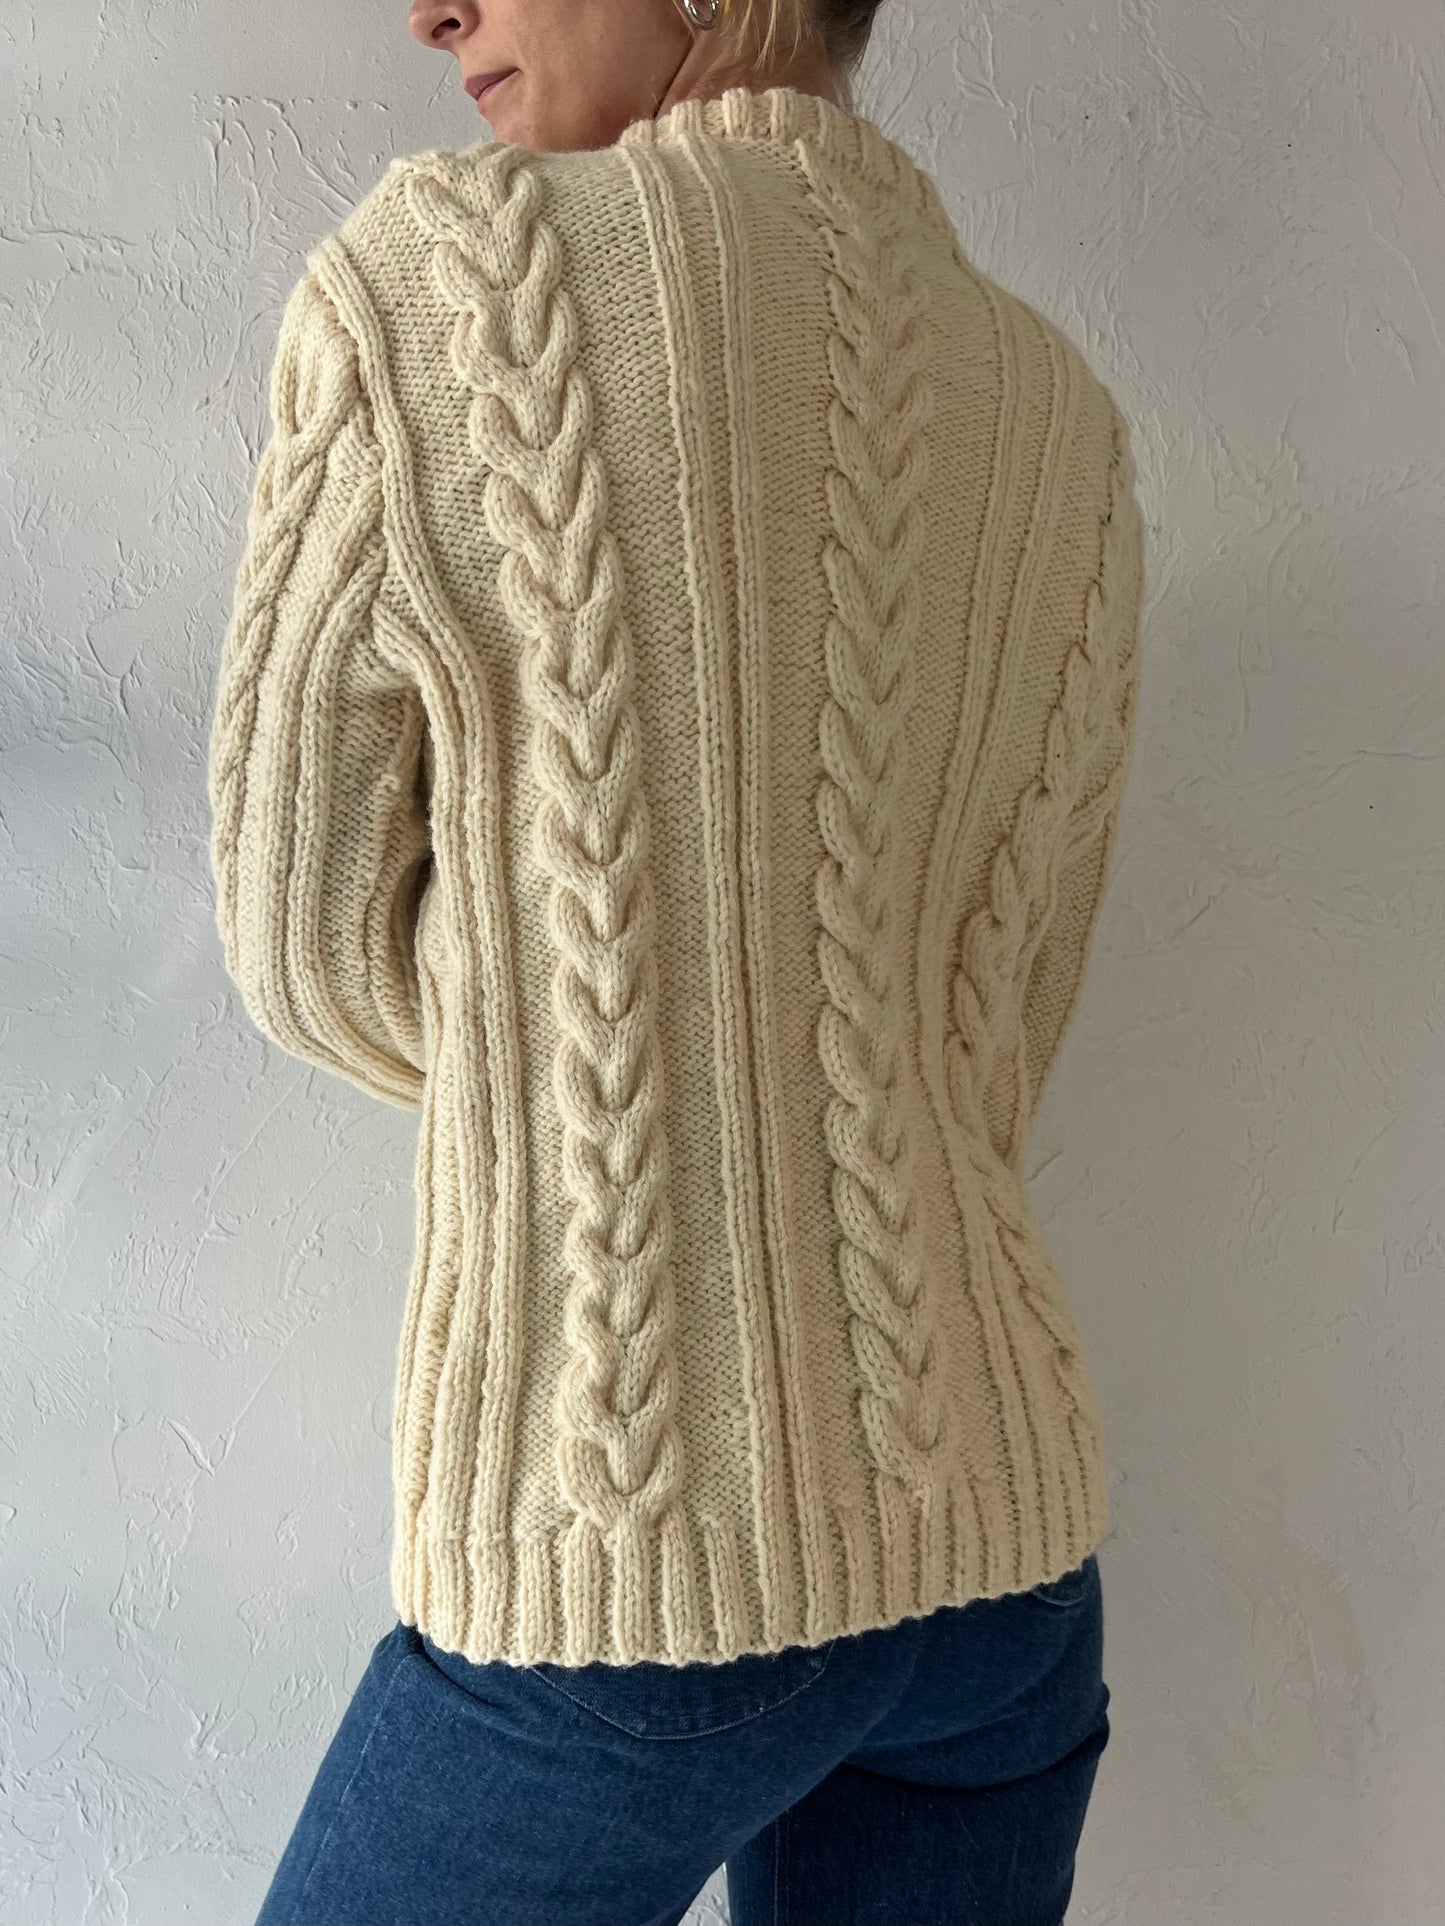 Vintage Mock Neck Cream Cable Knit Acrylic Wool Blend Sweater / Small